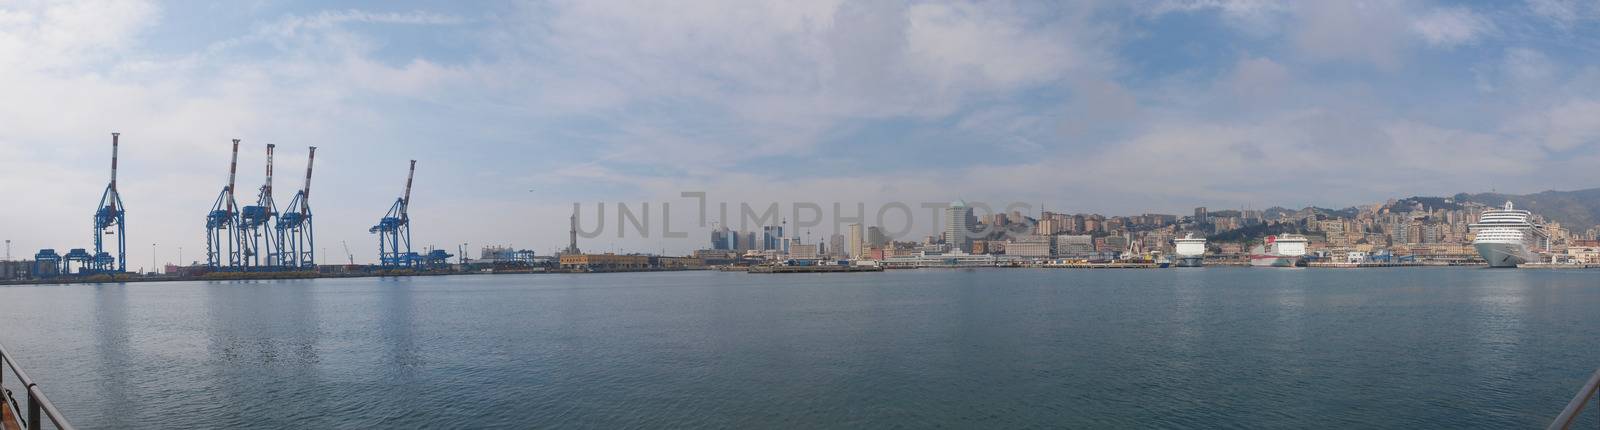 Wide panoramic view of the city of Genoa skyline from the sea